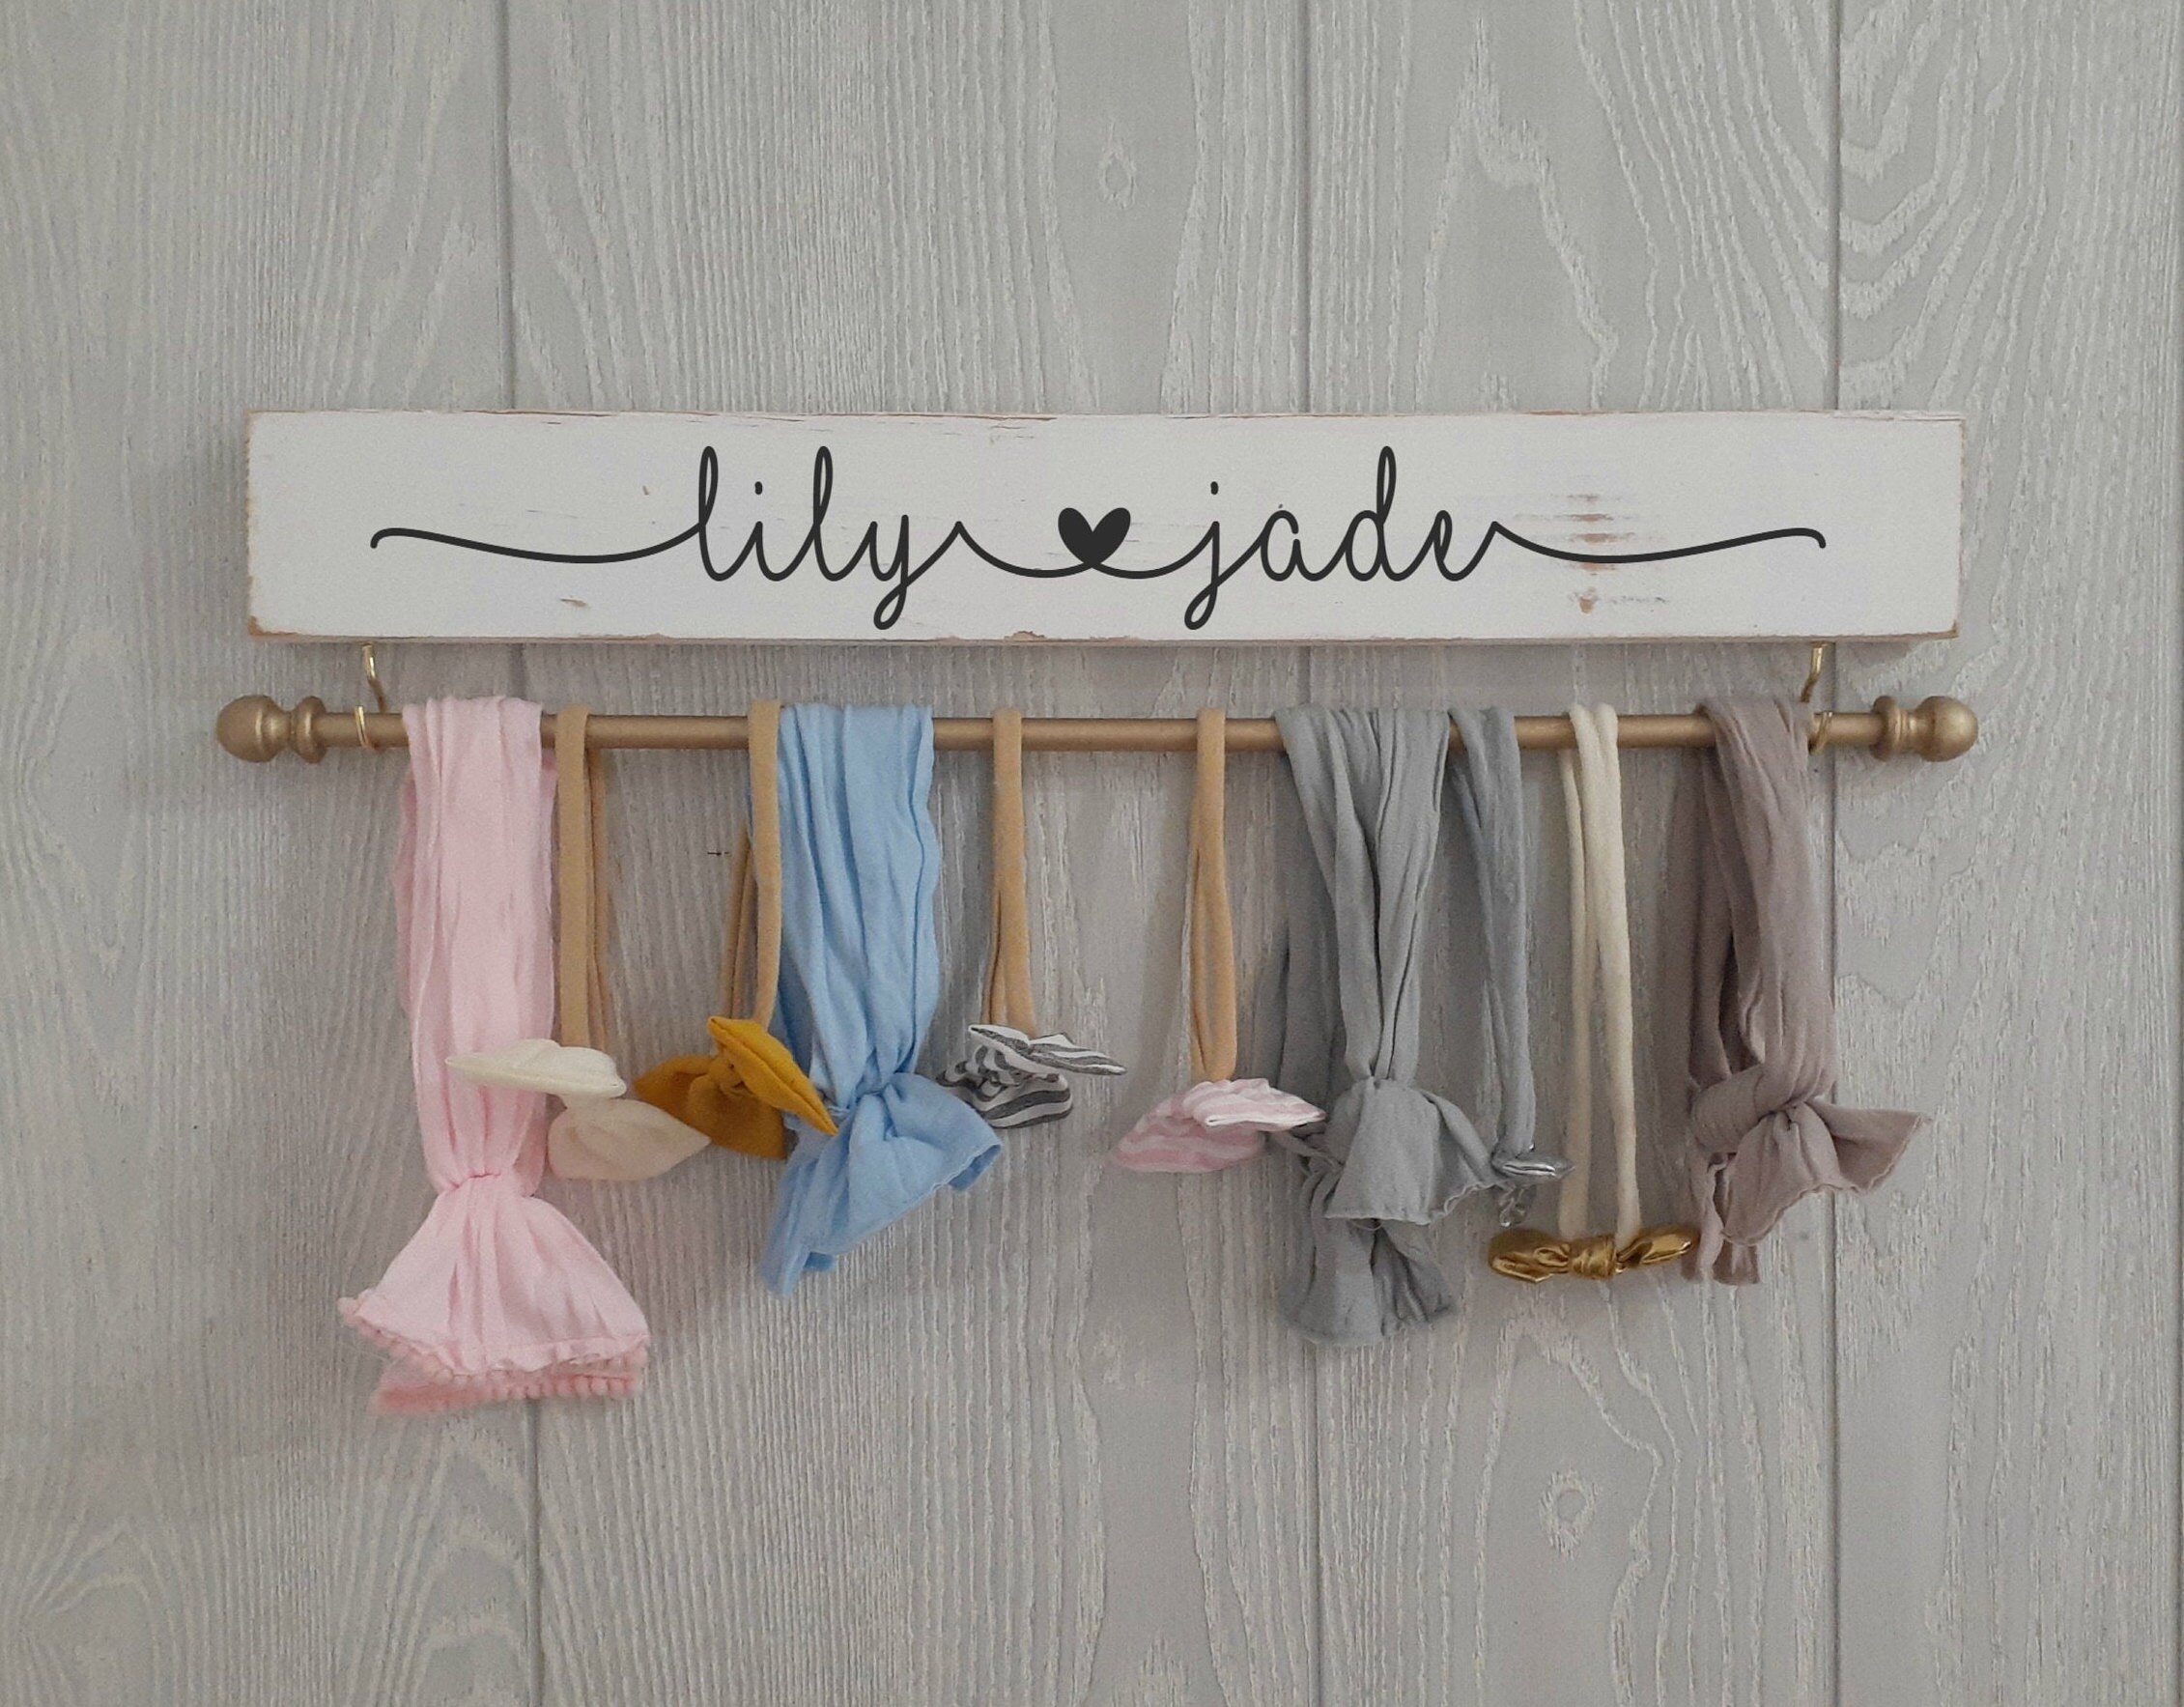  Hair Bow Holder for Walls, Hooks for Headbands and Jewelry,  Personalized Hair Bow Holder, Farmhouse Decor, Rustic Baby Nursery,  Personalized Baby Shower Gift, Organizer, Hair Bow Holder : Handmade  Products